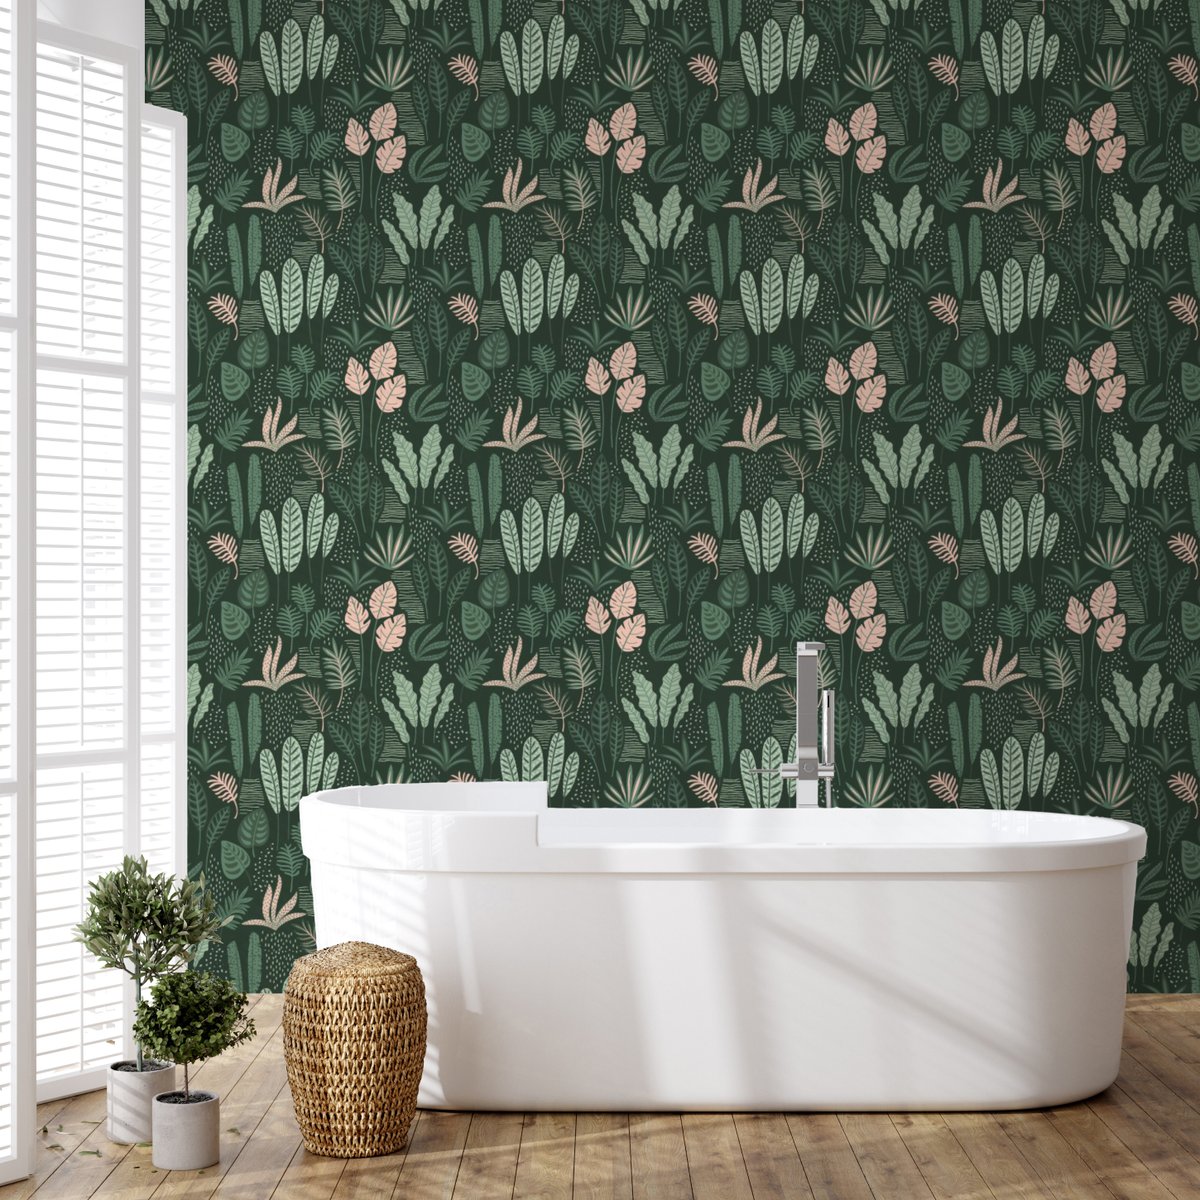 Bring the beauty of nature indoors with our Jade Green Abstract Leaves #Wallpaper #Mural. #wallart #art #homedecor #walldecor #artistic #unique #chic #trendy #leafdesign #green #abstractart #interiordesign #homestyle #giffywalls #peelandstickwallpaper

bit.ly/492Sf3e